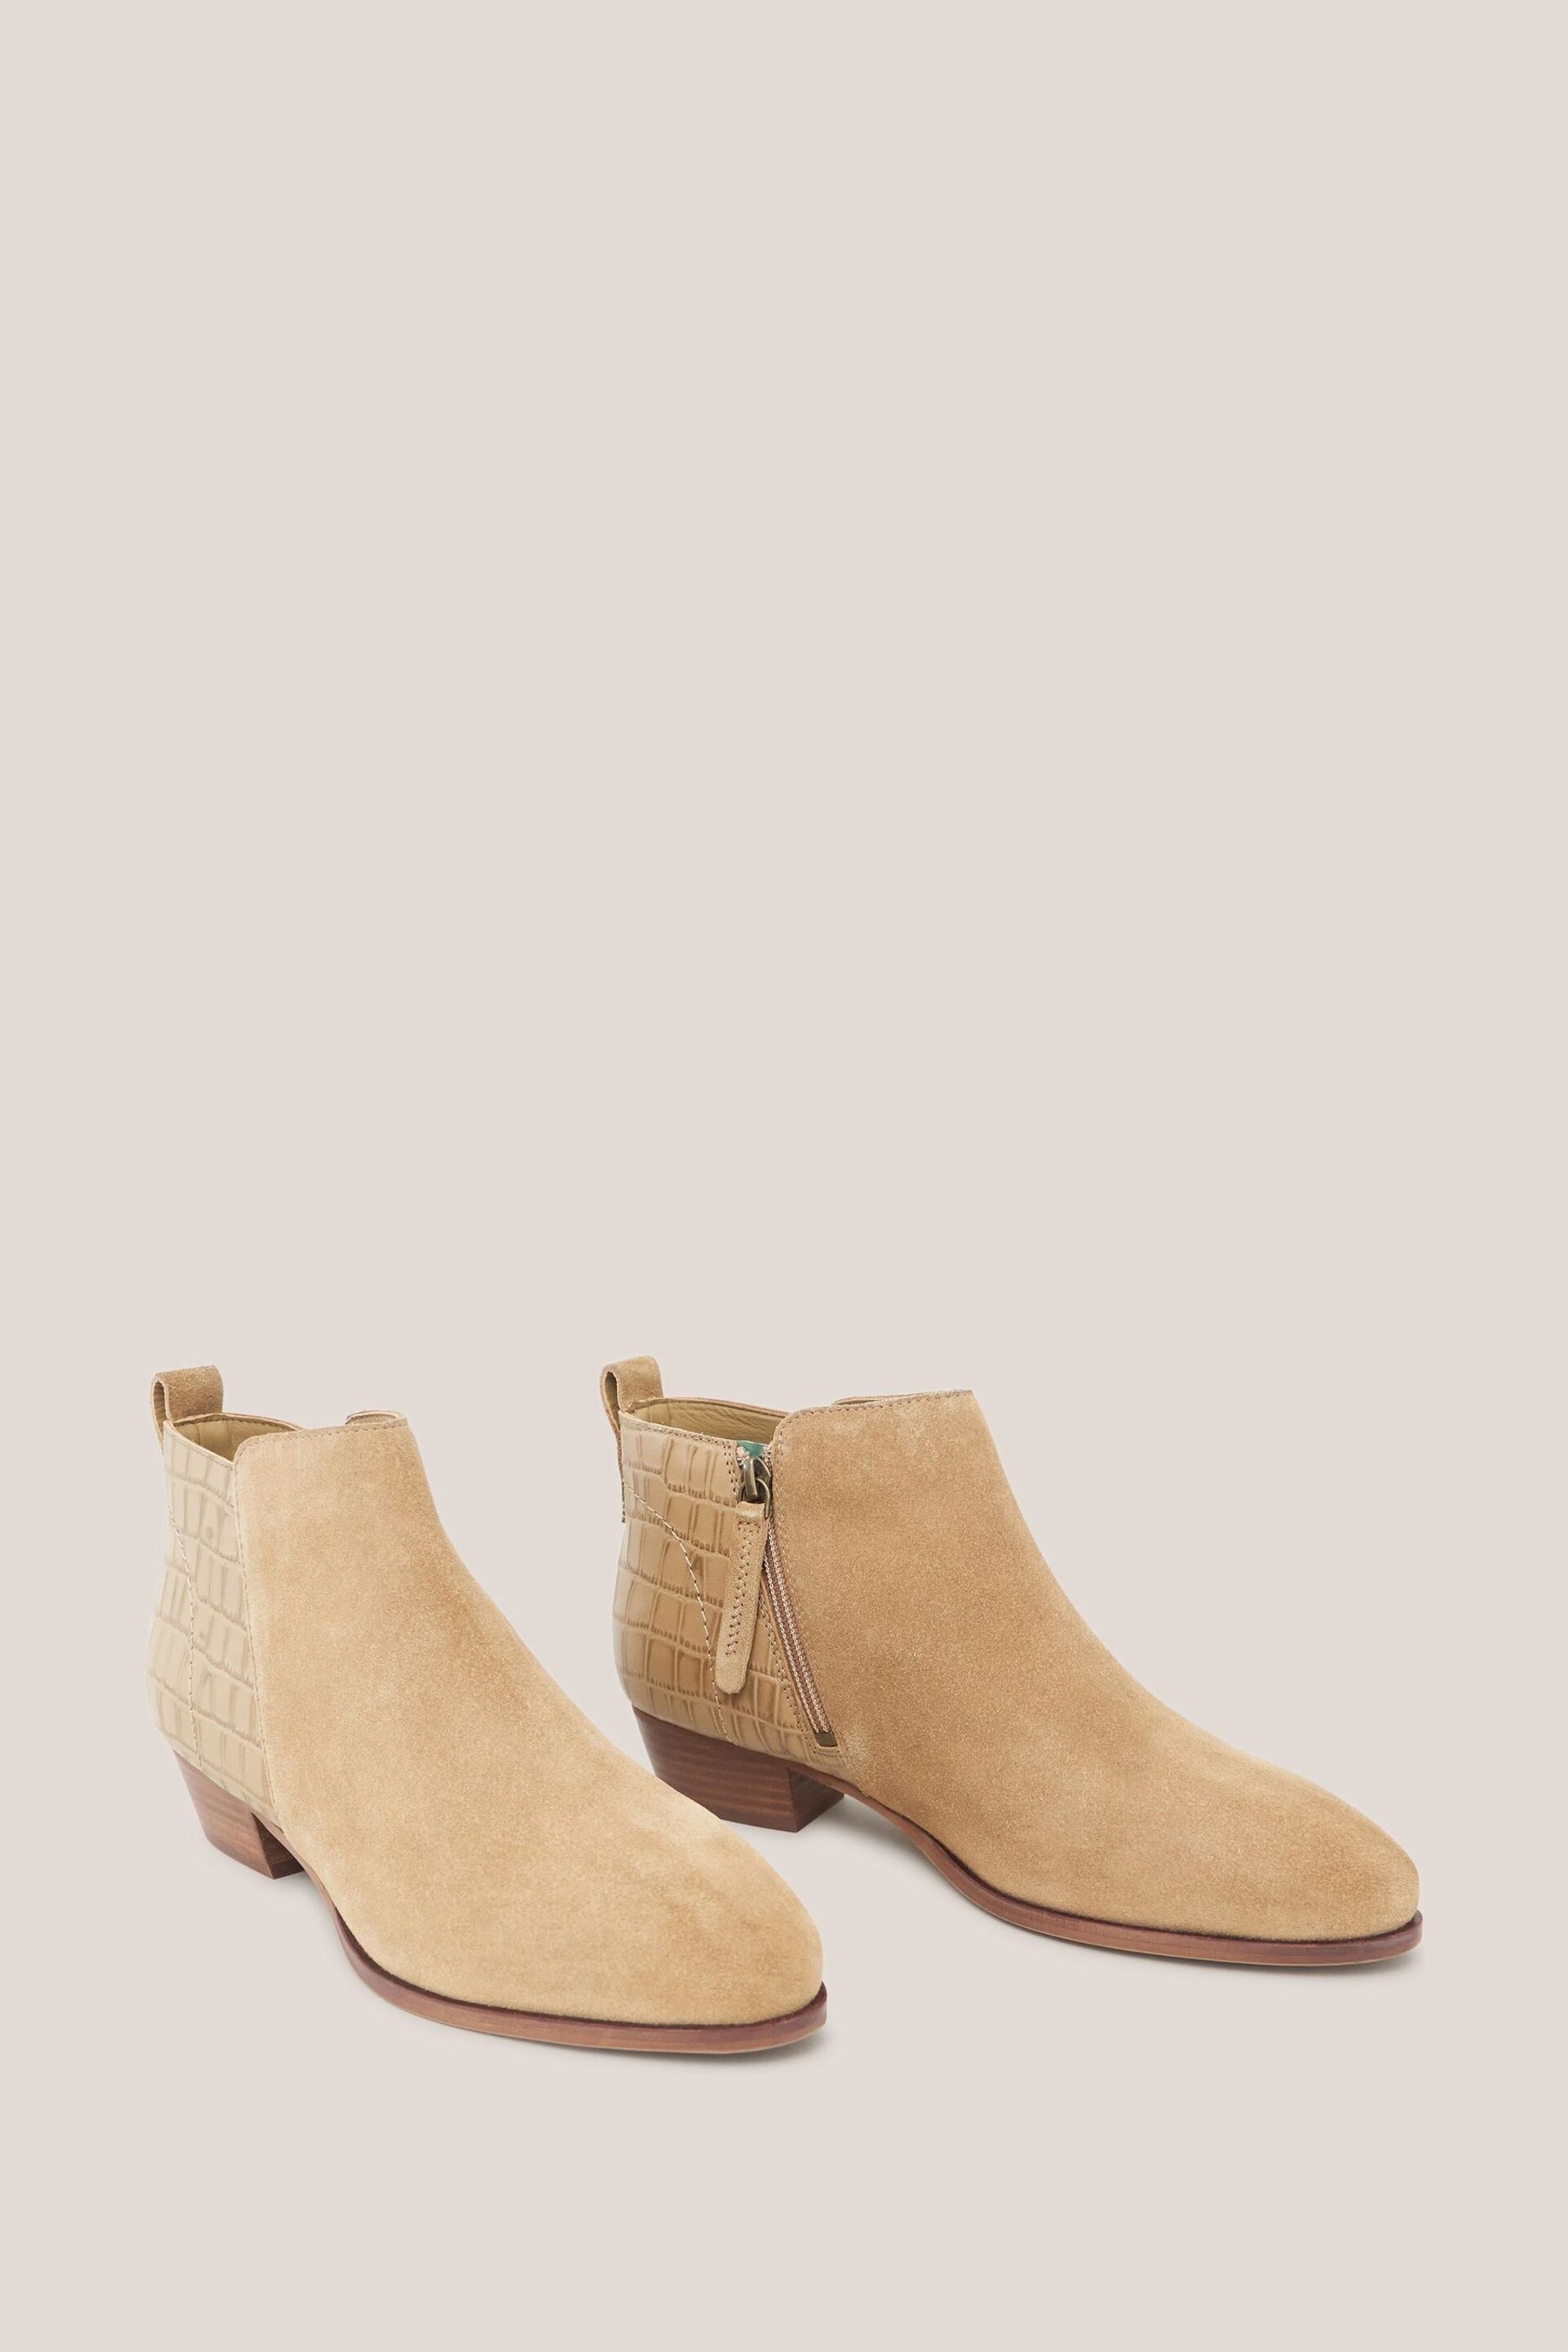 White Stuff Natural Willow Leather Ankle Boots - Image 2 of 3